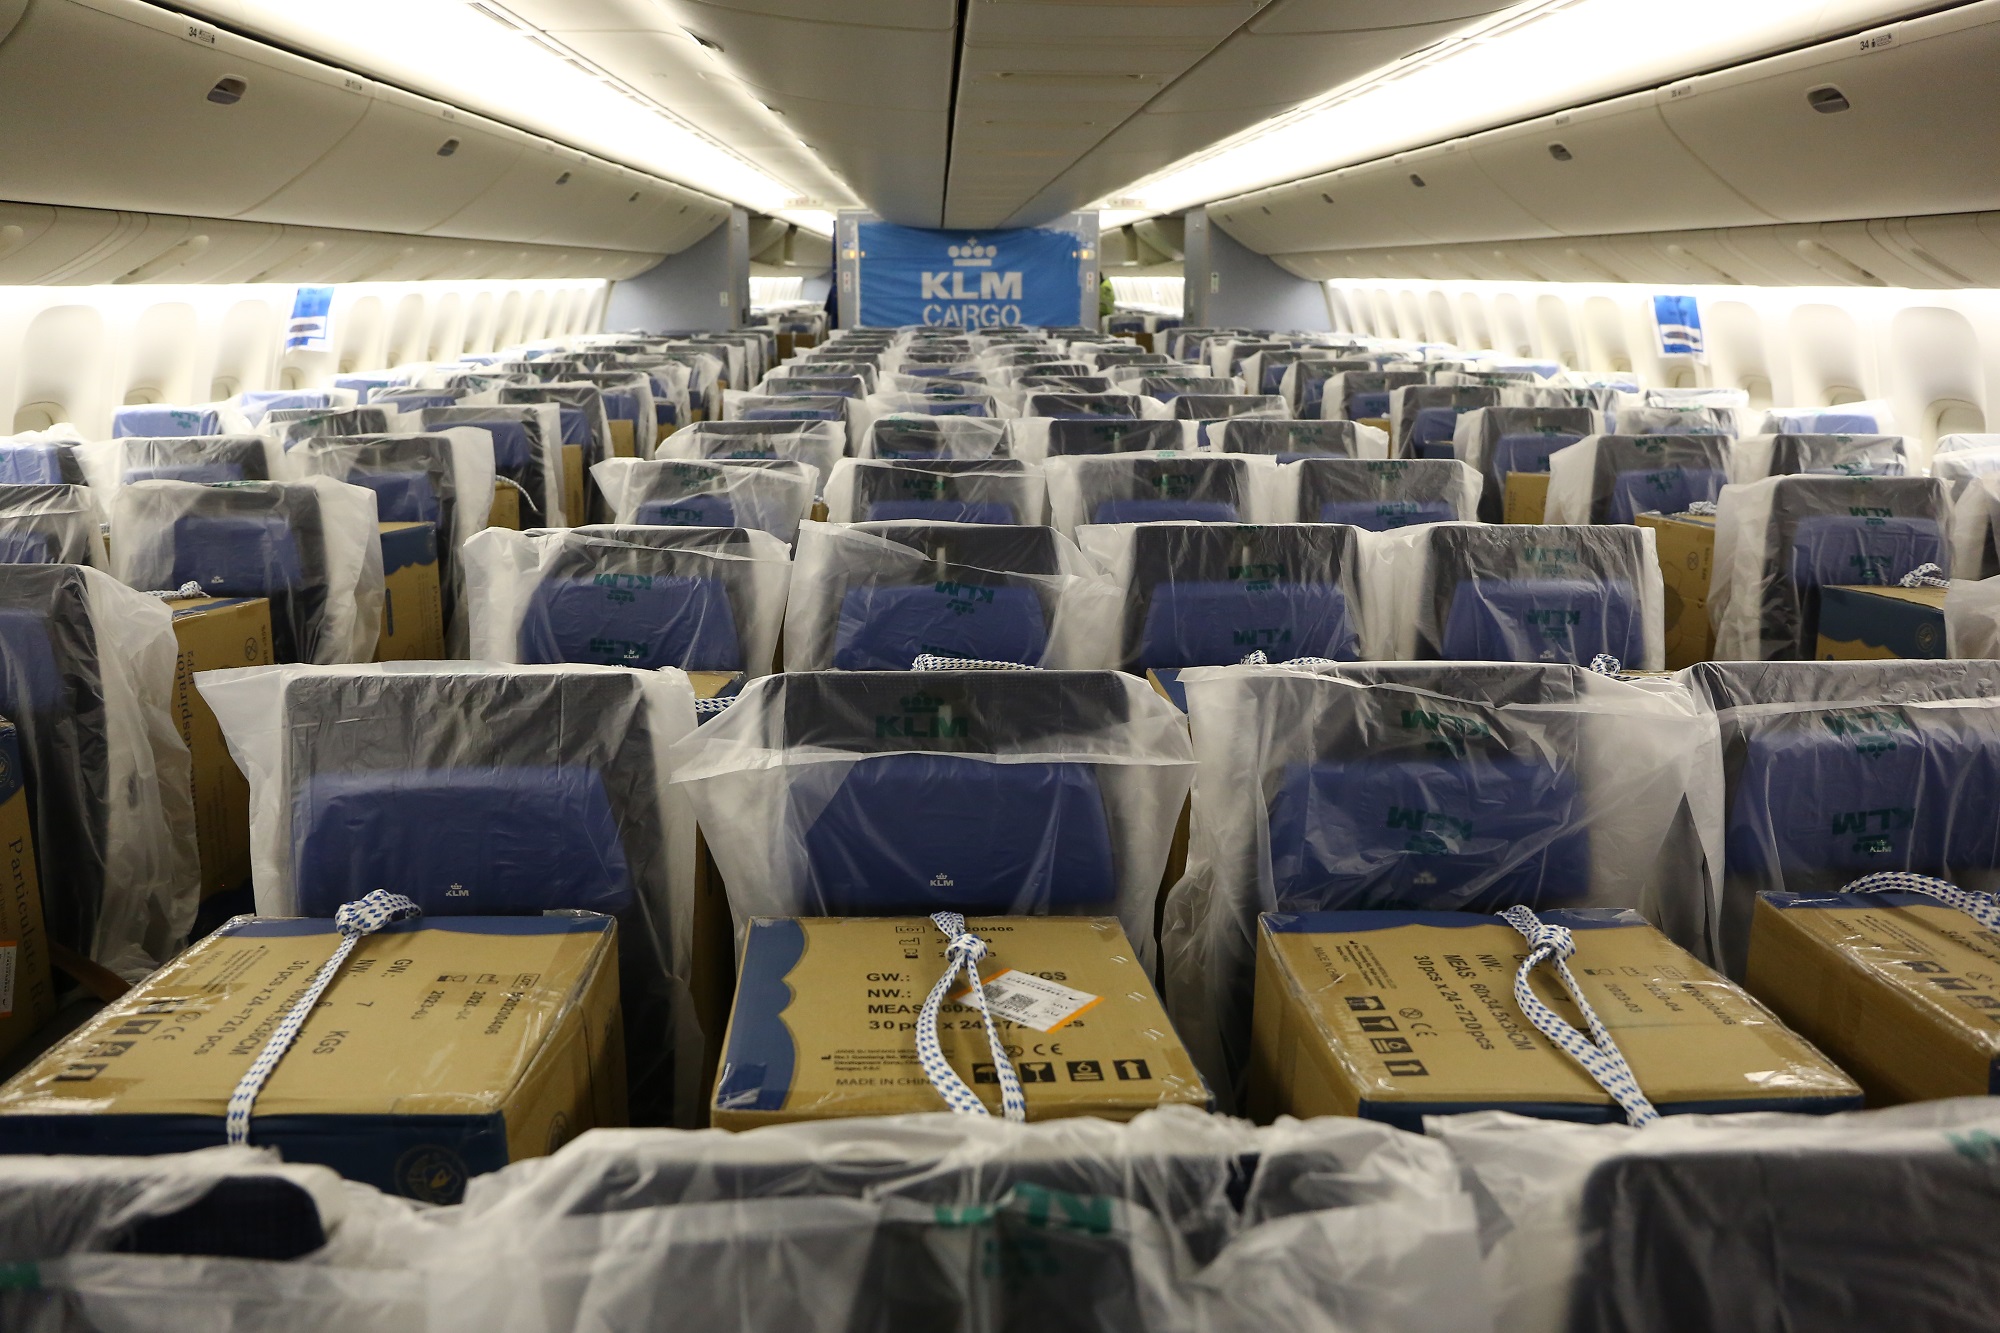 KLM’s first cargo-only B777 pax aircraft takes-off